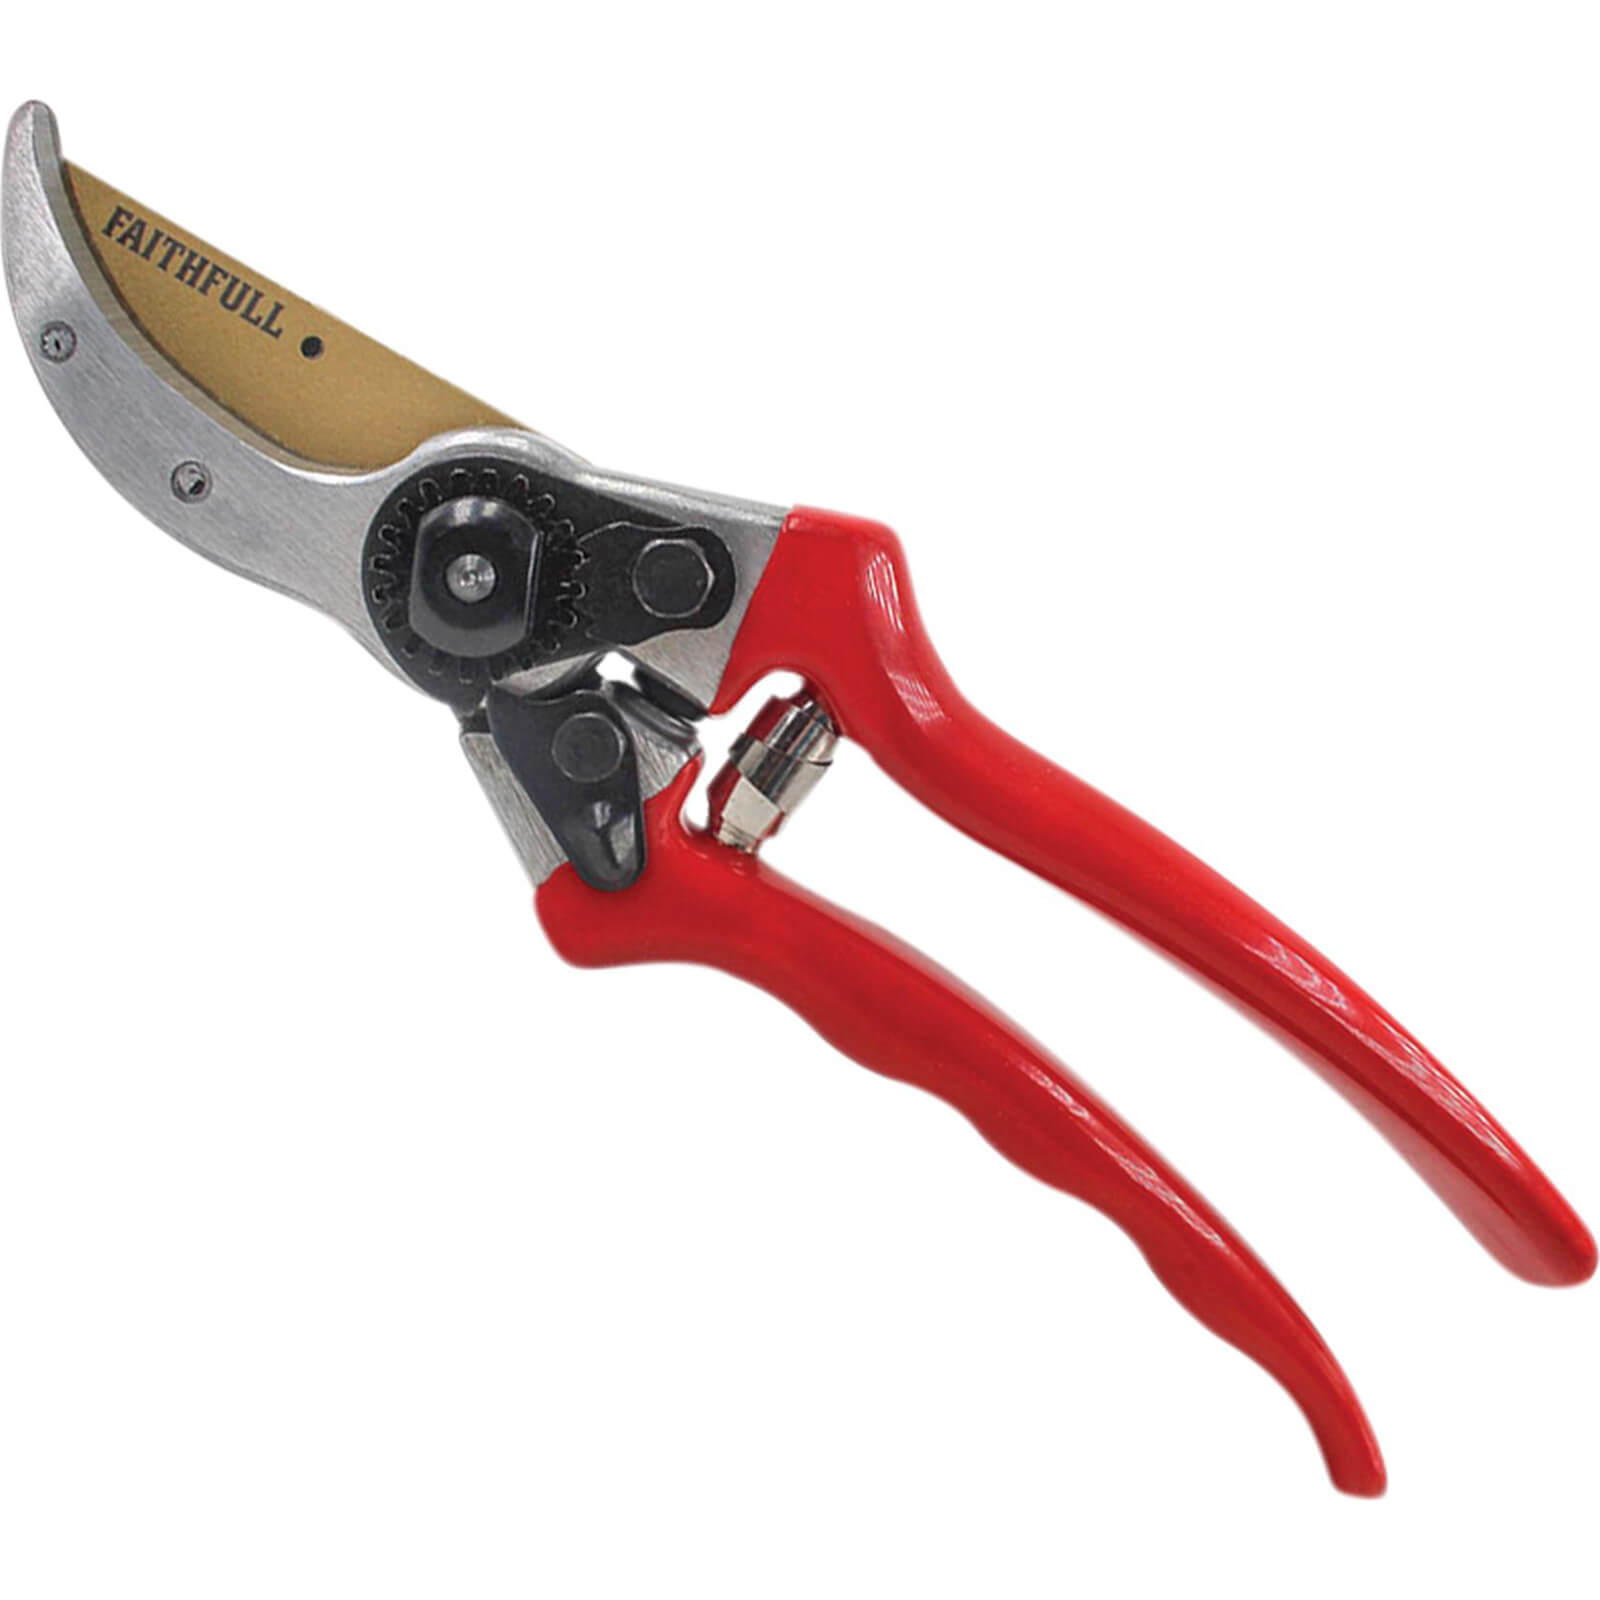 Image of Faithfull Countryman Professional Bypass Secateurs 215mm